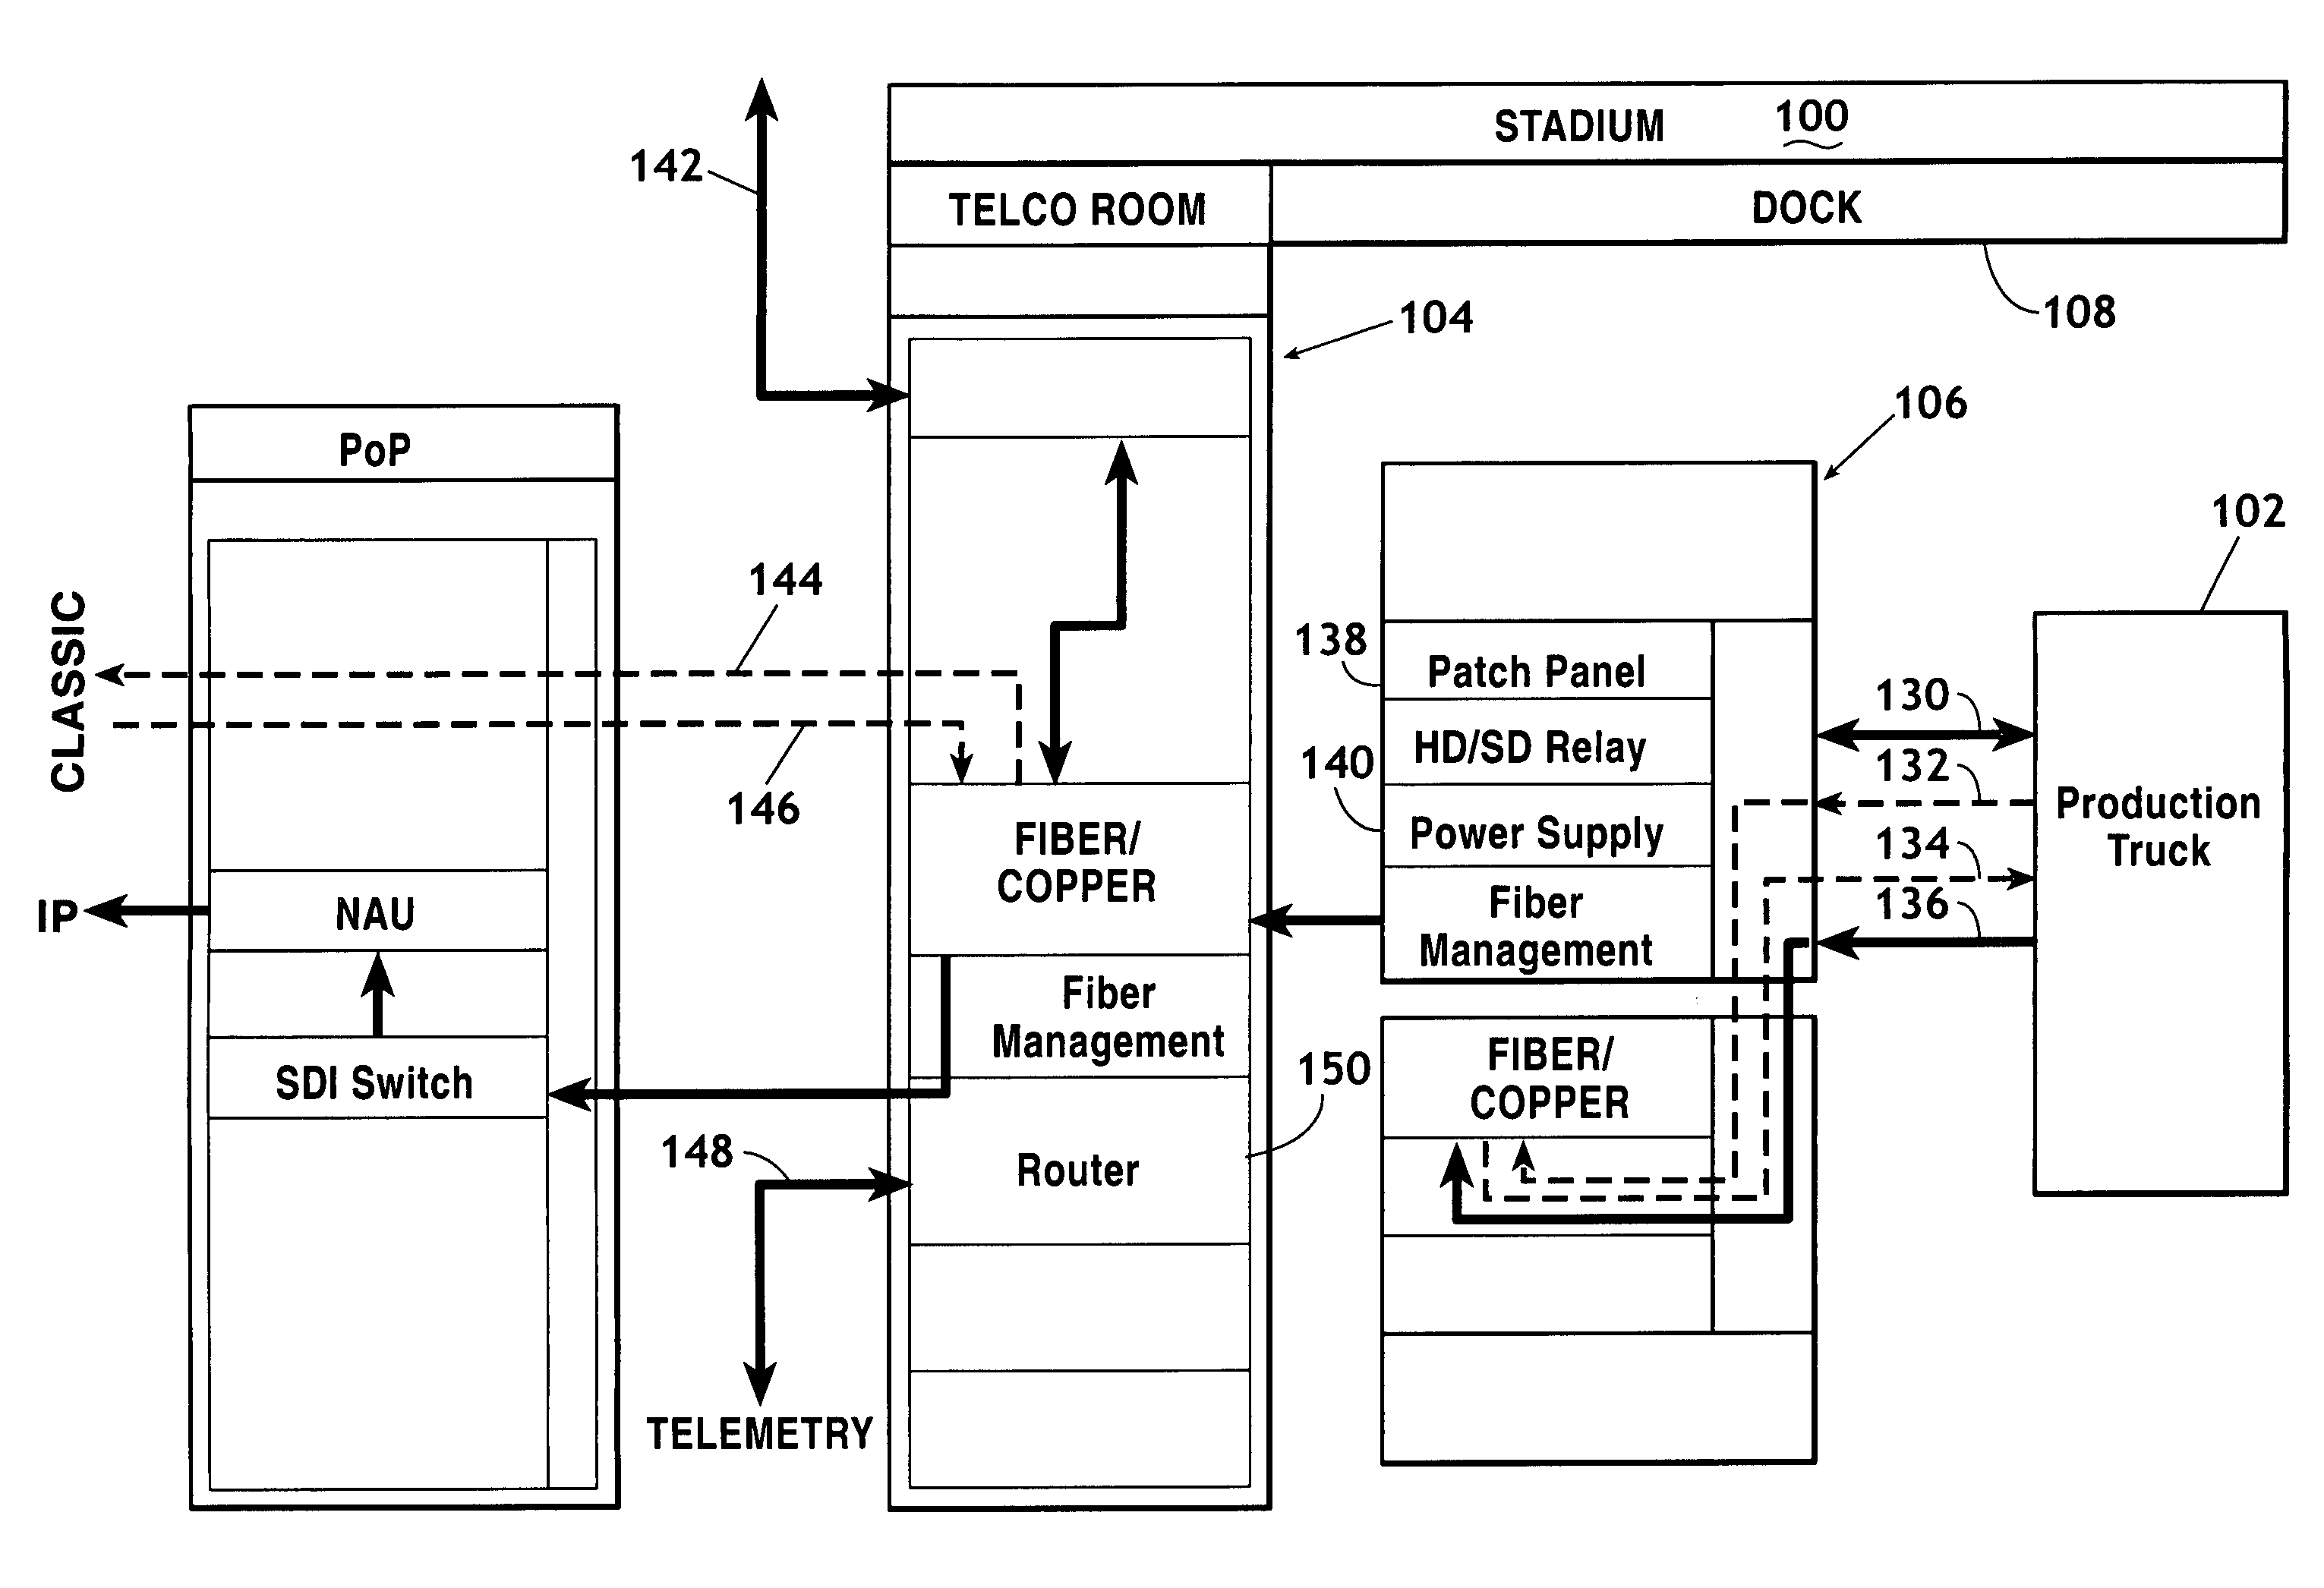 Method for the transmission and distribution of digital television signals